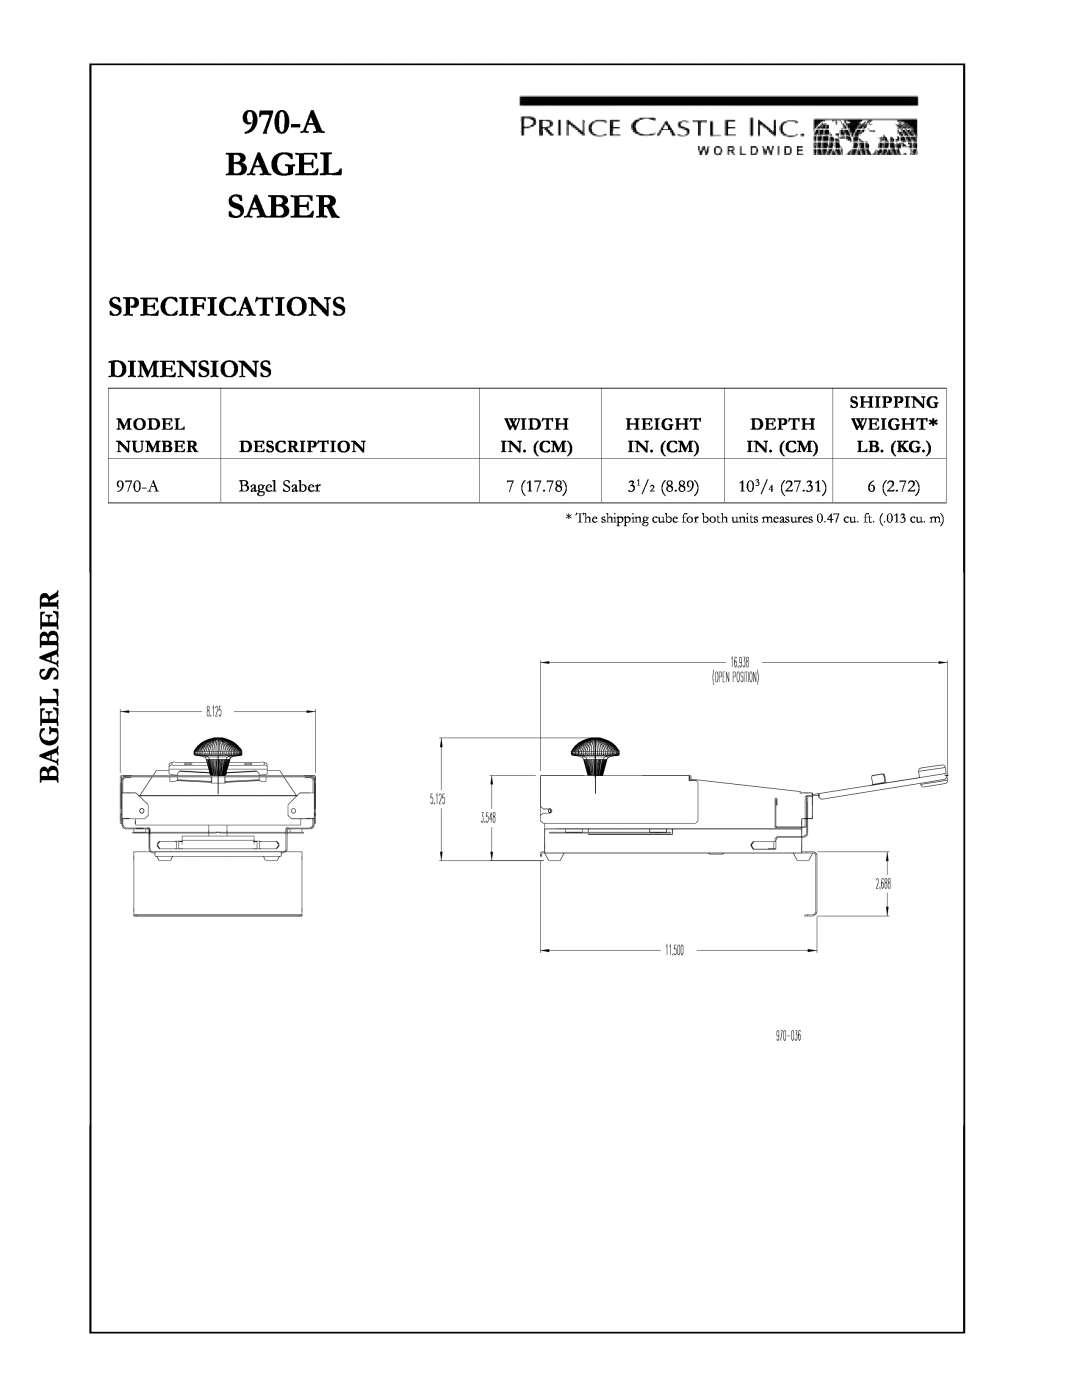 Prince Castle 970-A specifications A Bagel Saber, Specifications, Dimensions 